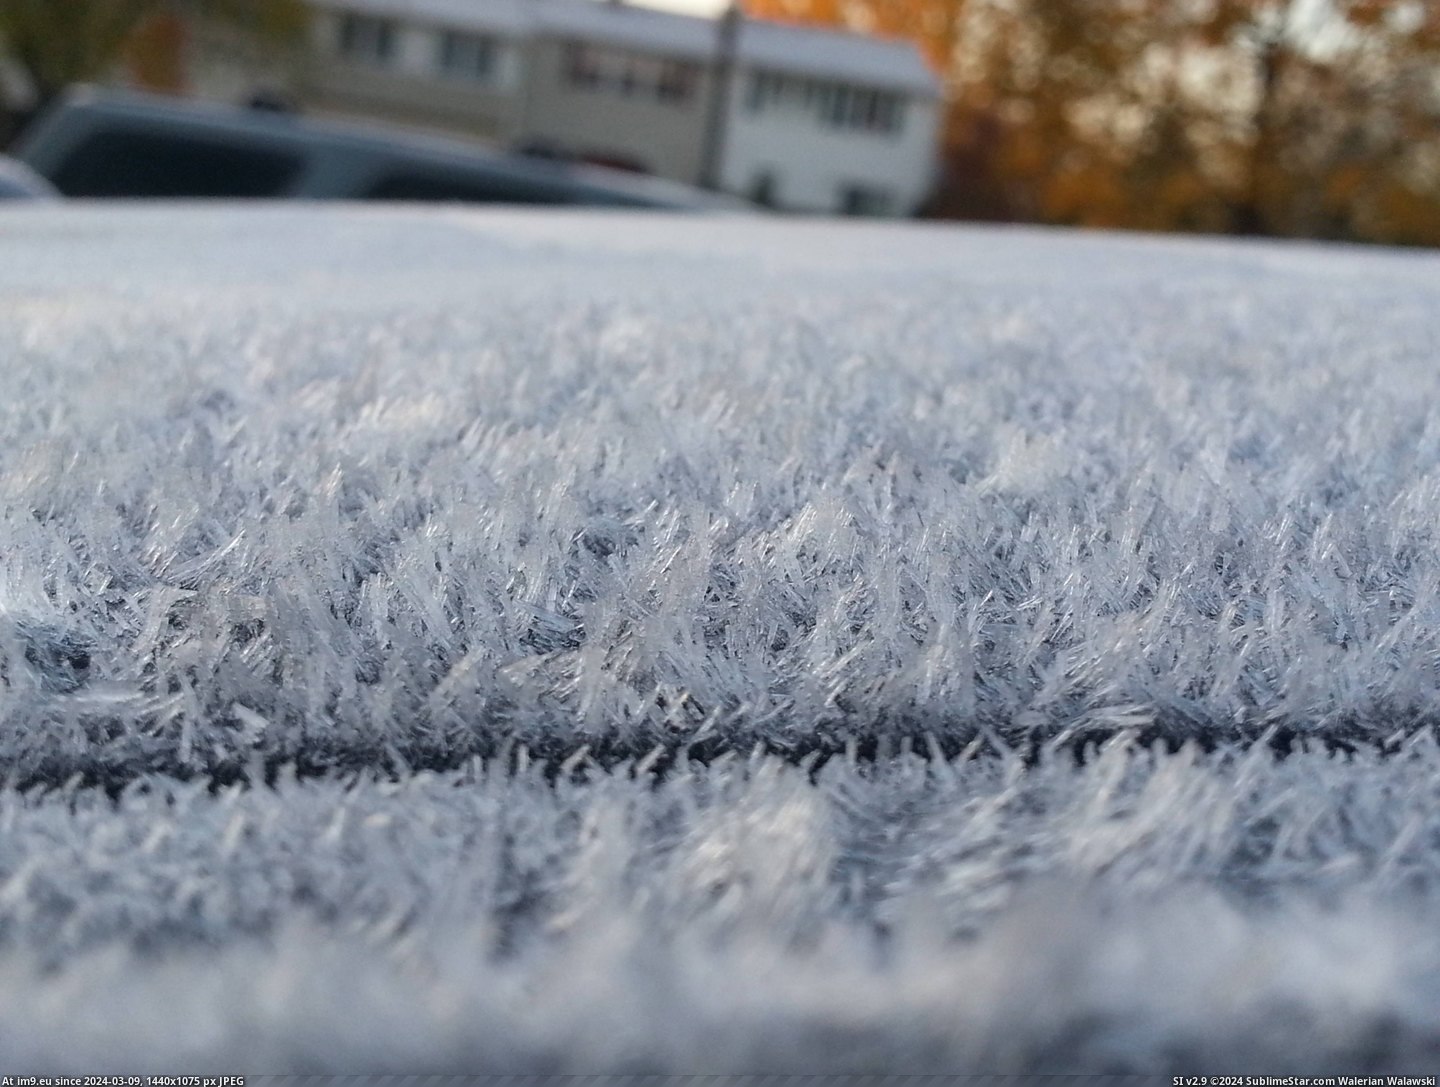 #Morning #Frost #Car [Pics] The frost on my car this morning Pic. (Изображение из альбом My r/PICS favs))